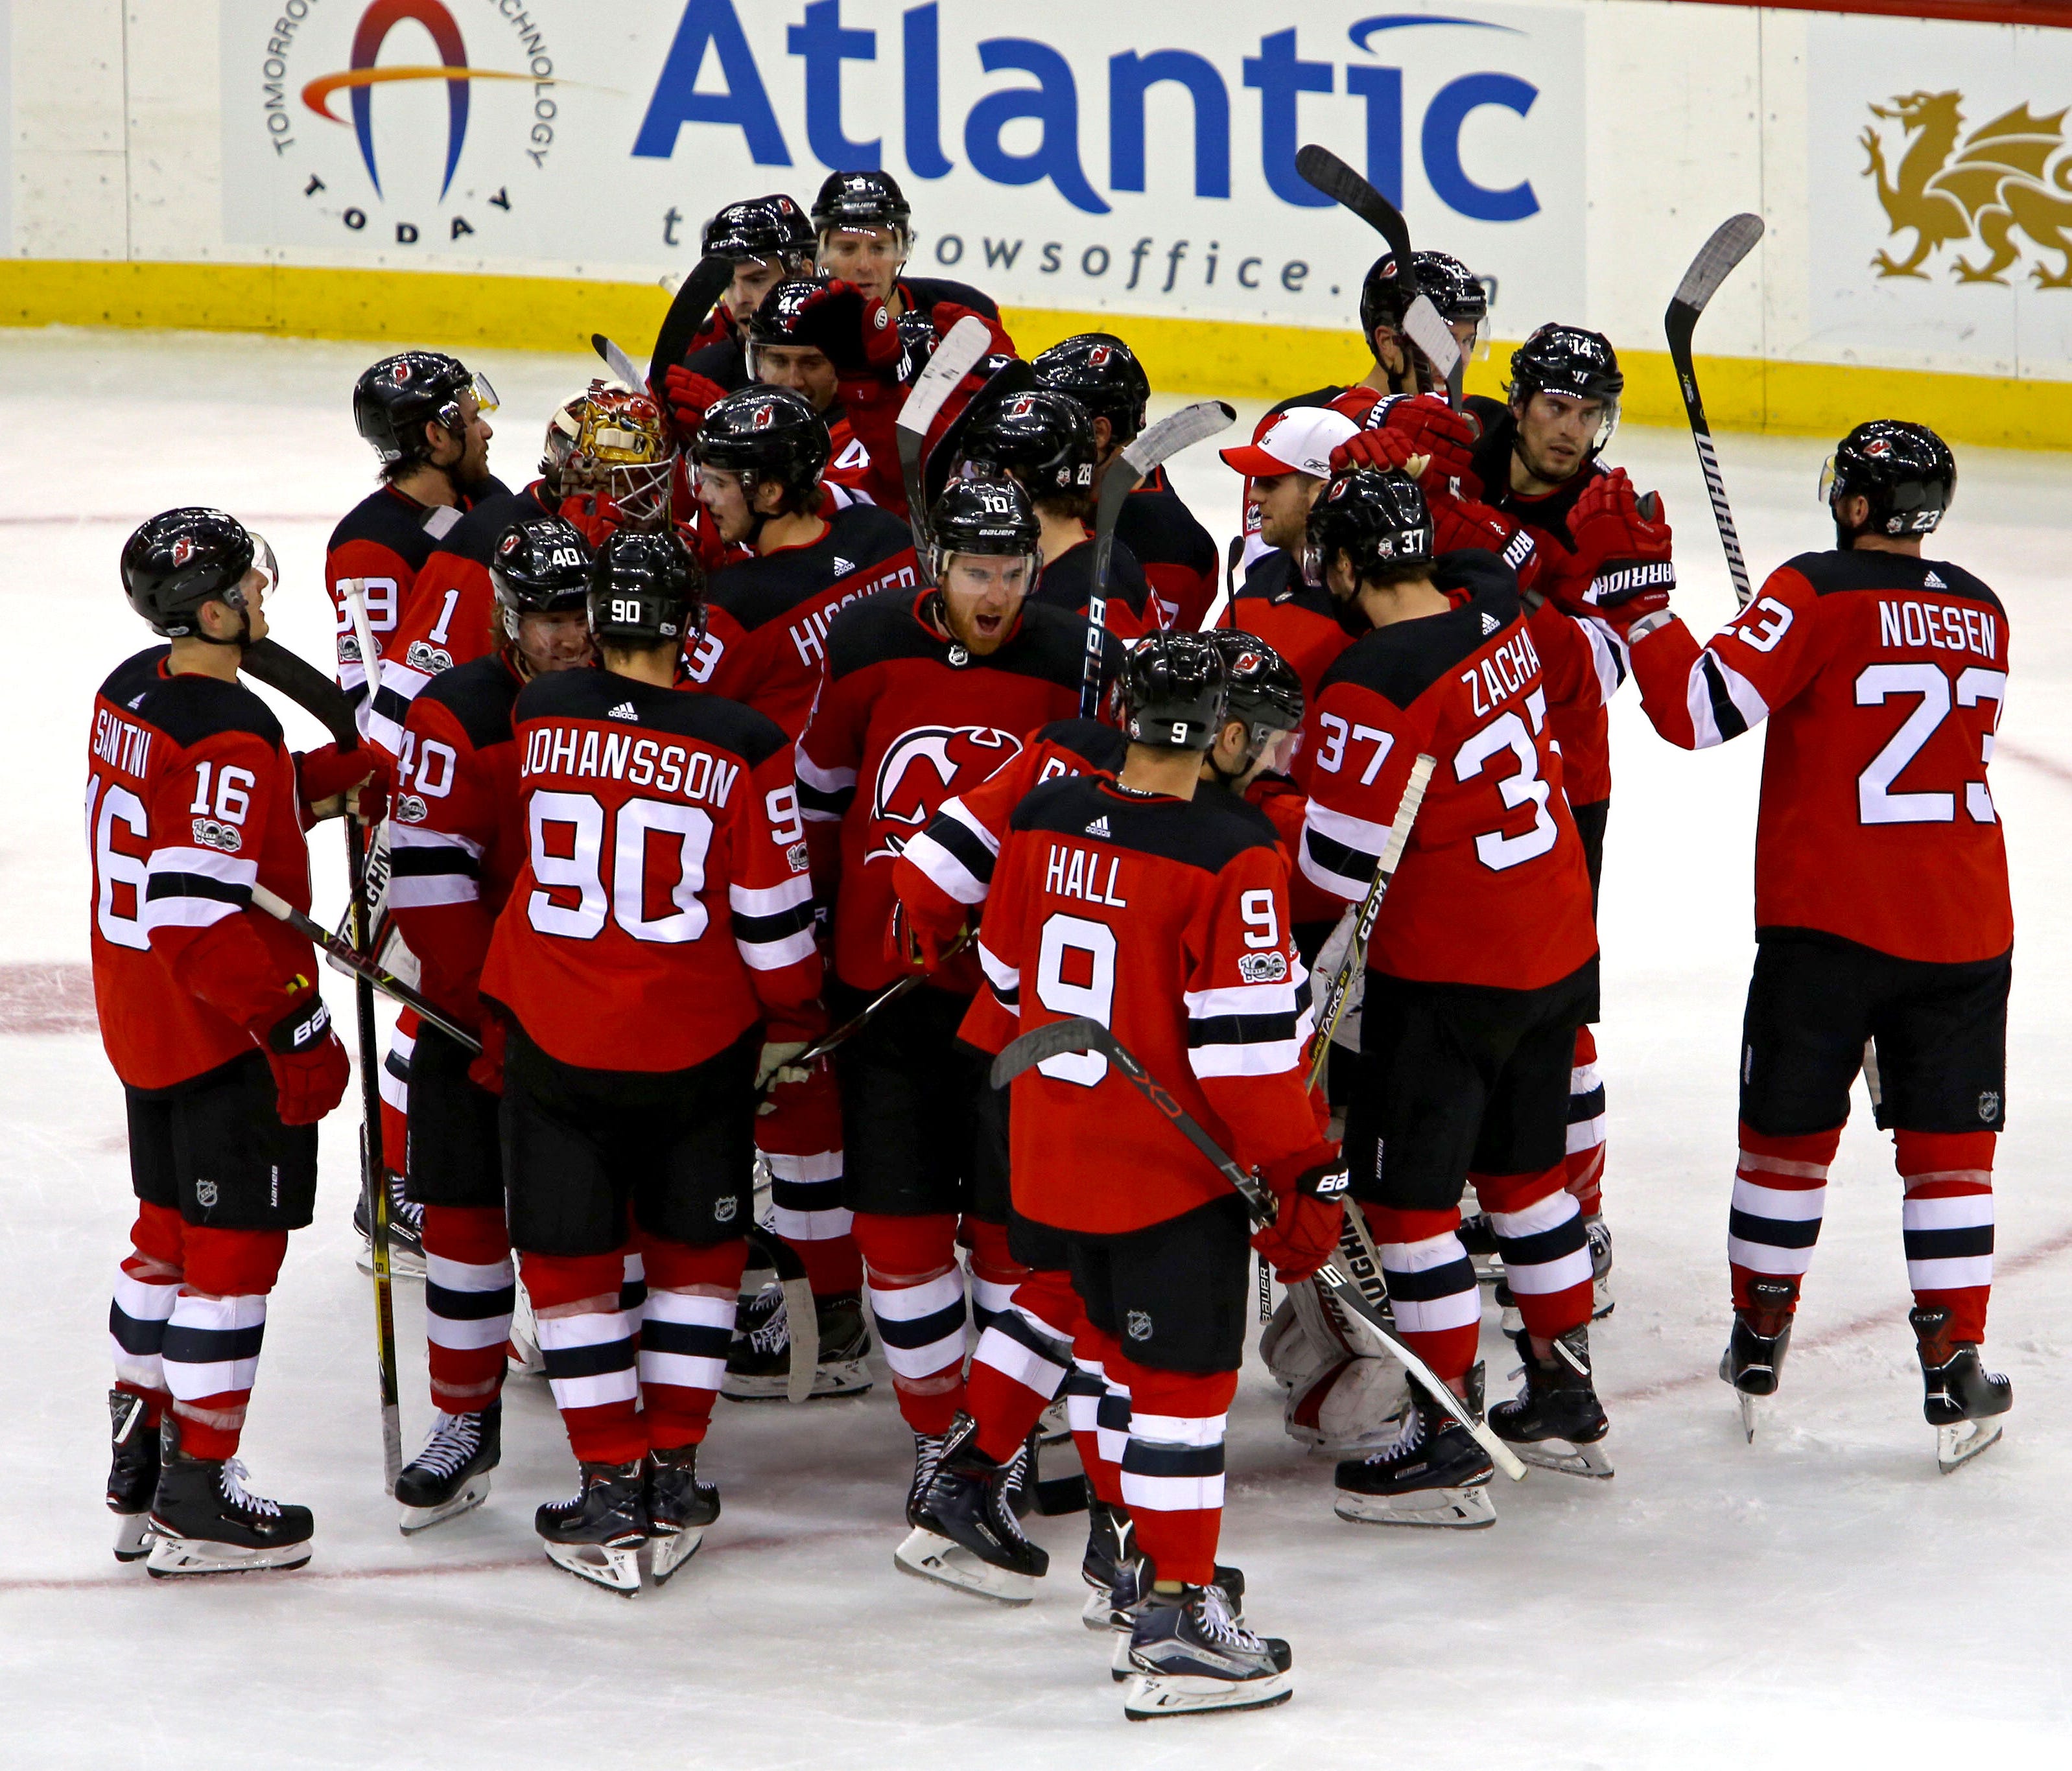 The New Jersey Devils celebrate after beating the Ottawa Senators 5-4 in a shootout at Prudential Center.